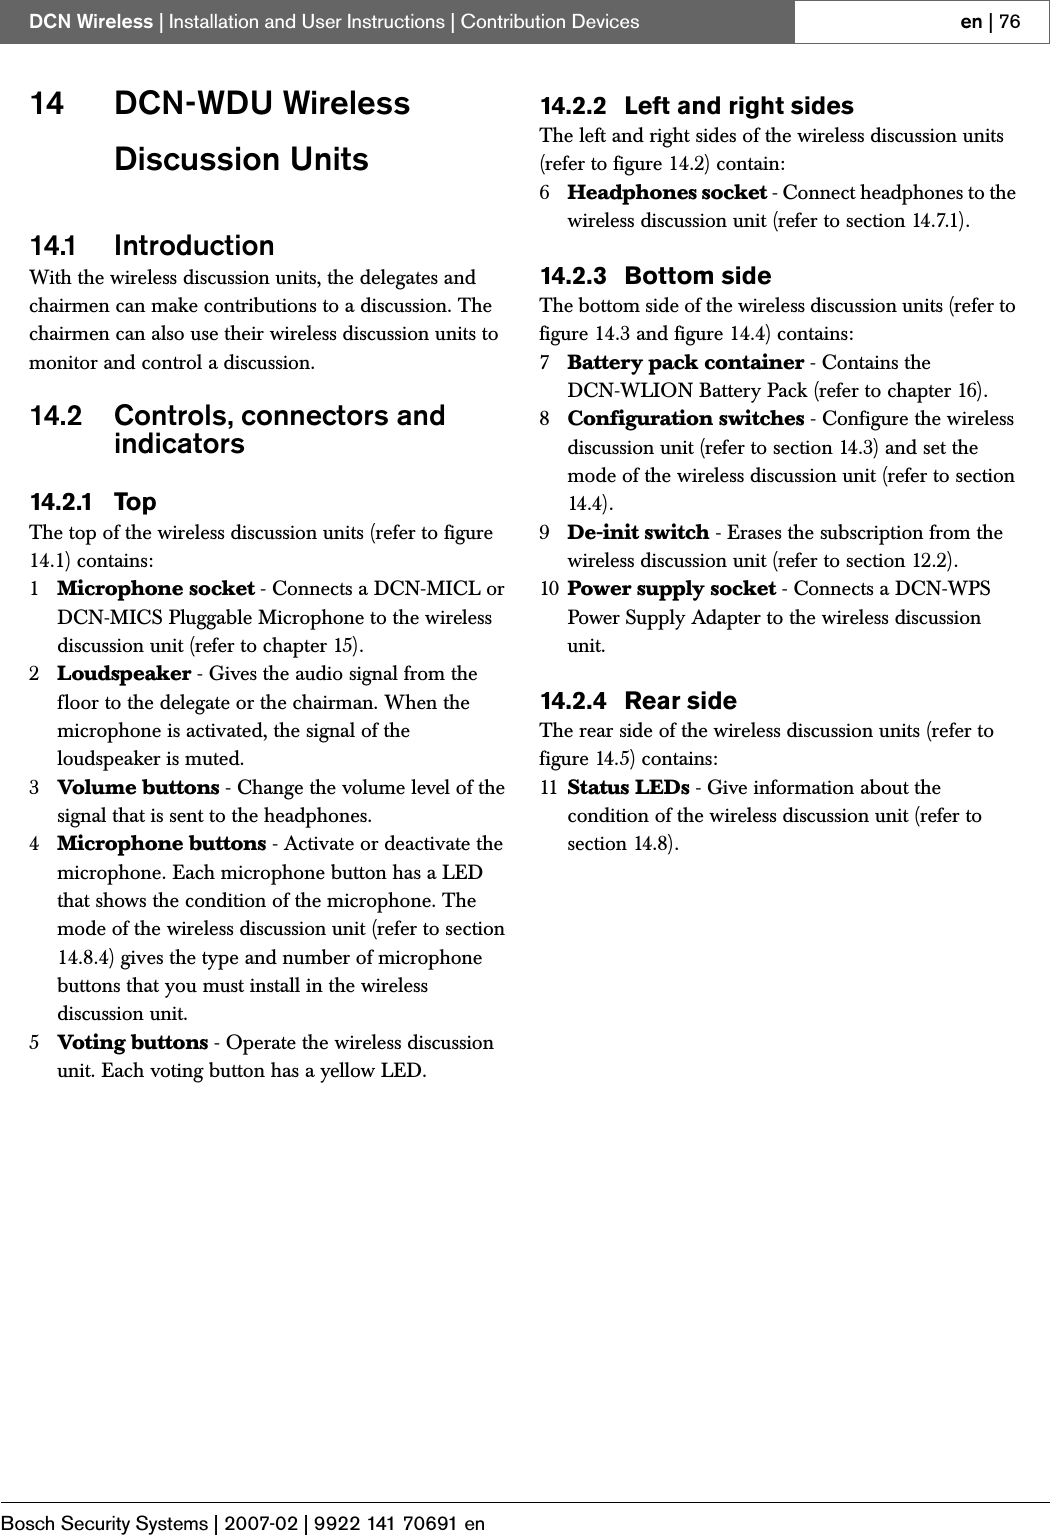 Page 47 of Bosch Security Systems DCNWAP Wireless Access Point User Manual Part 2